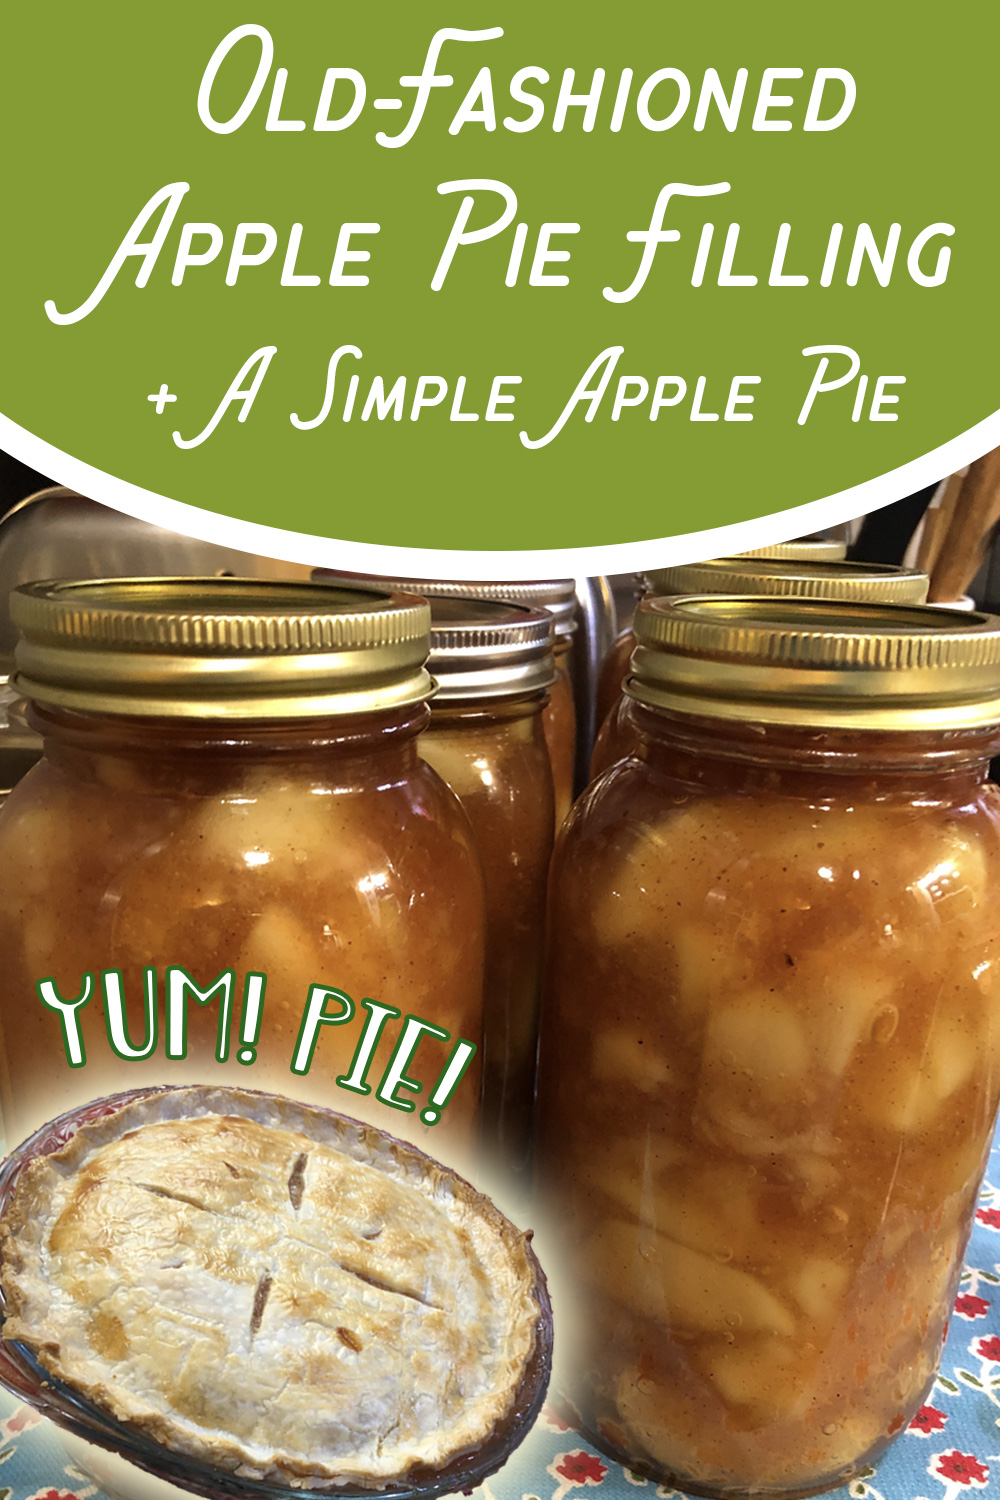 How to make old-fashioned apple pie filling (and a simple apple pie!)